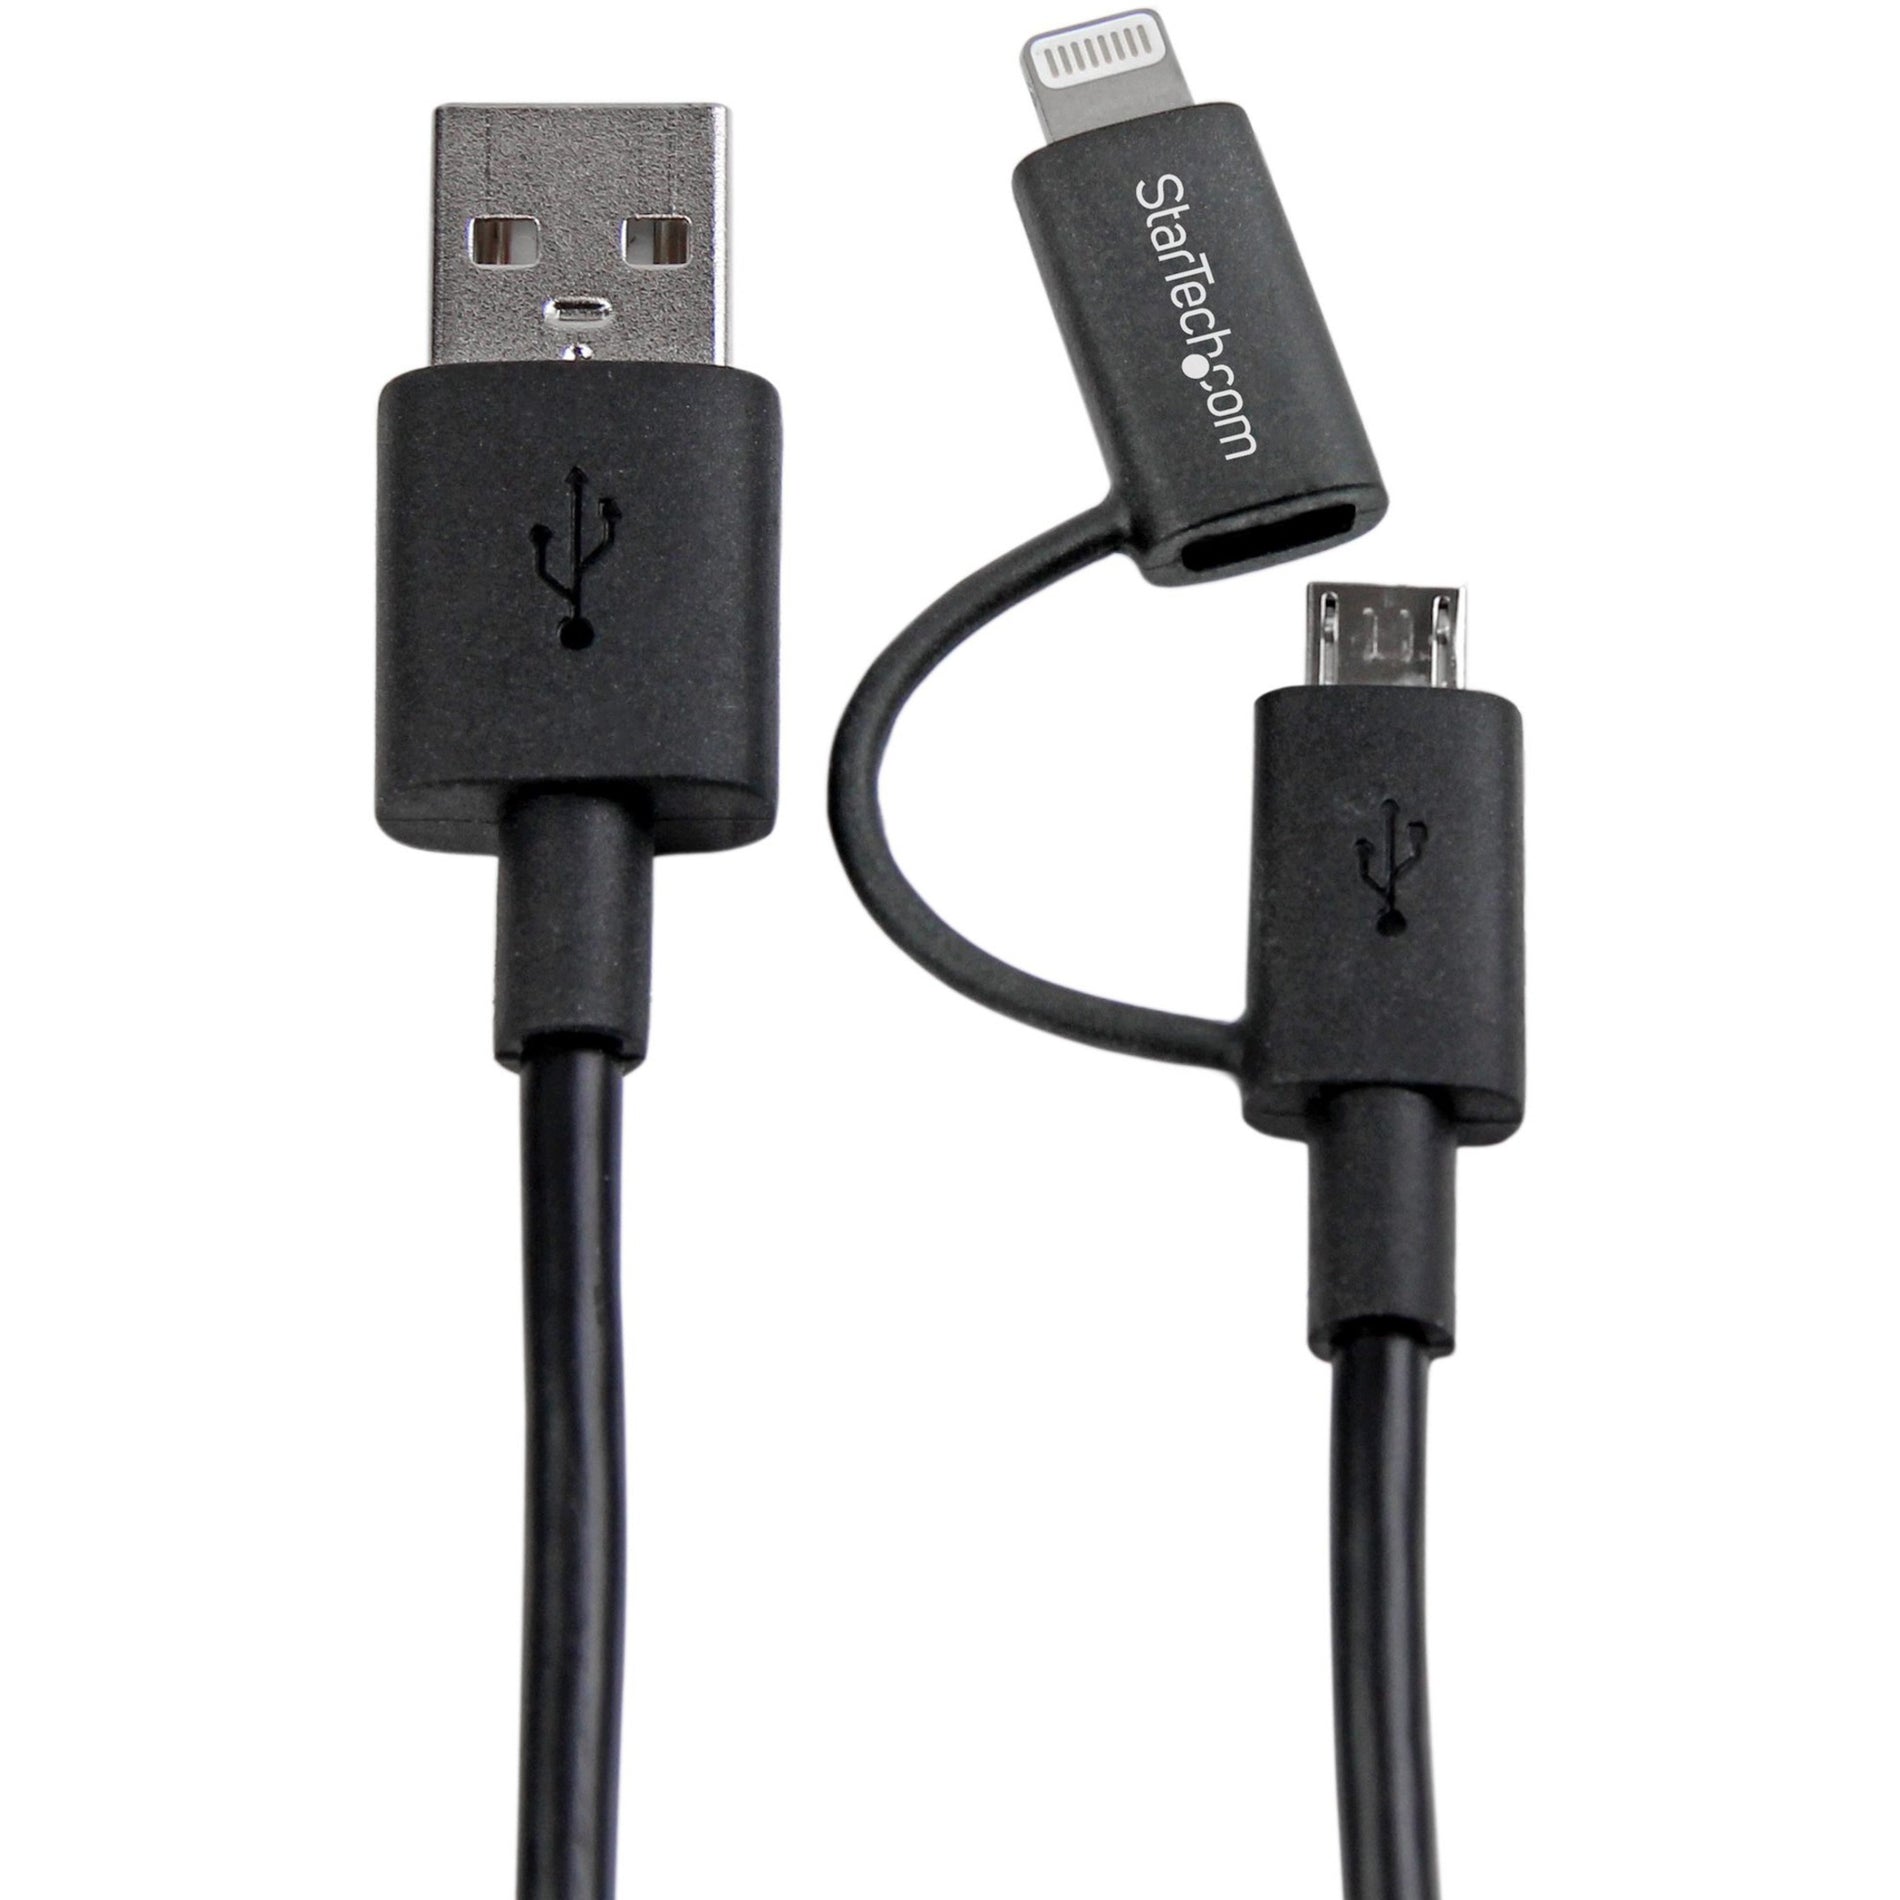 StarTech.com LTUB1MBK Lightning or Micro USB to USB Cable 1m (3ft), Black, for iPhone / iPod / iPad